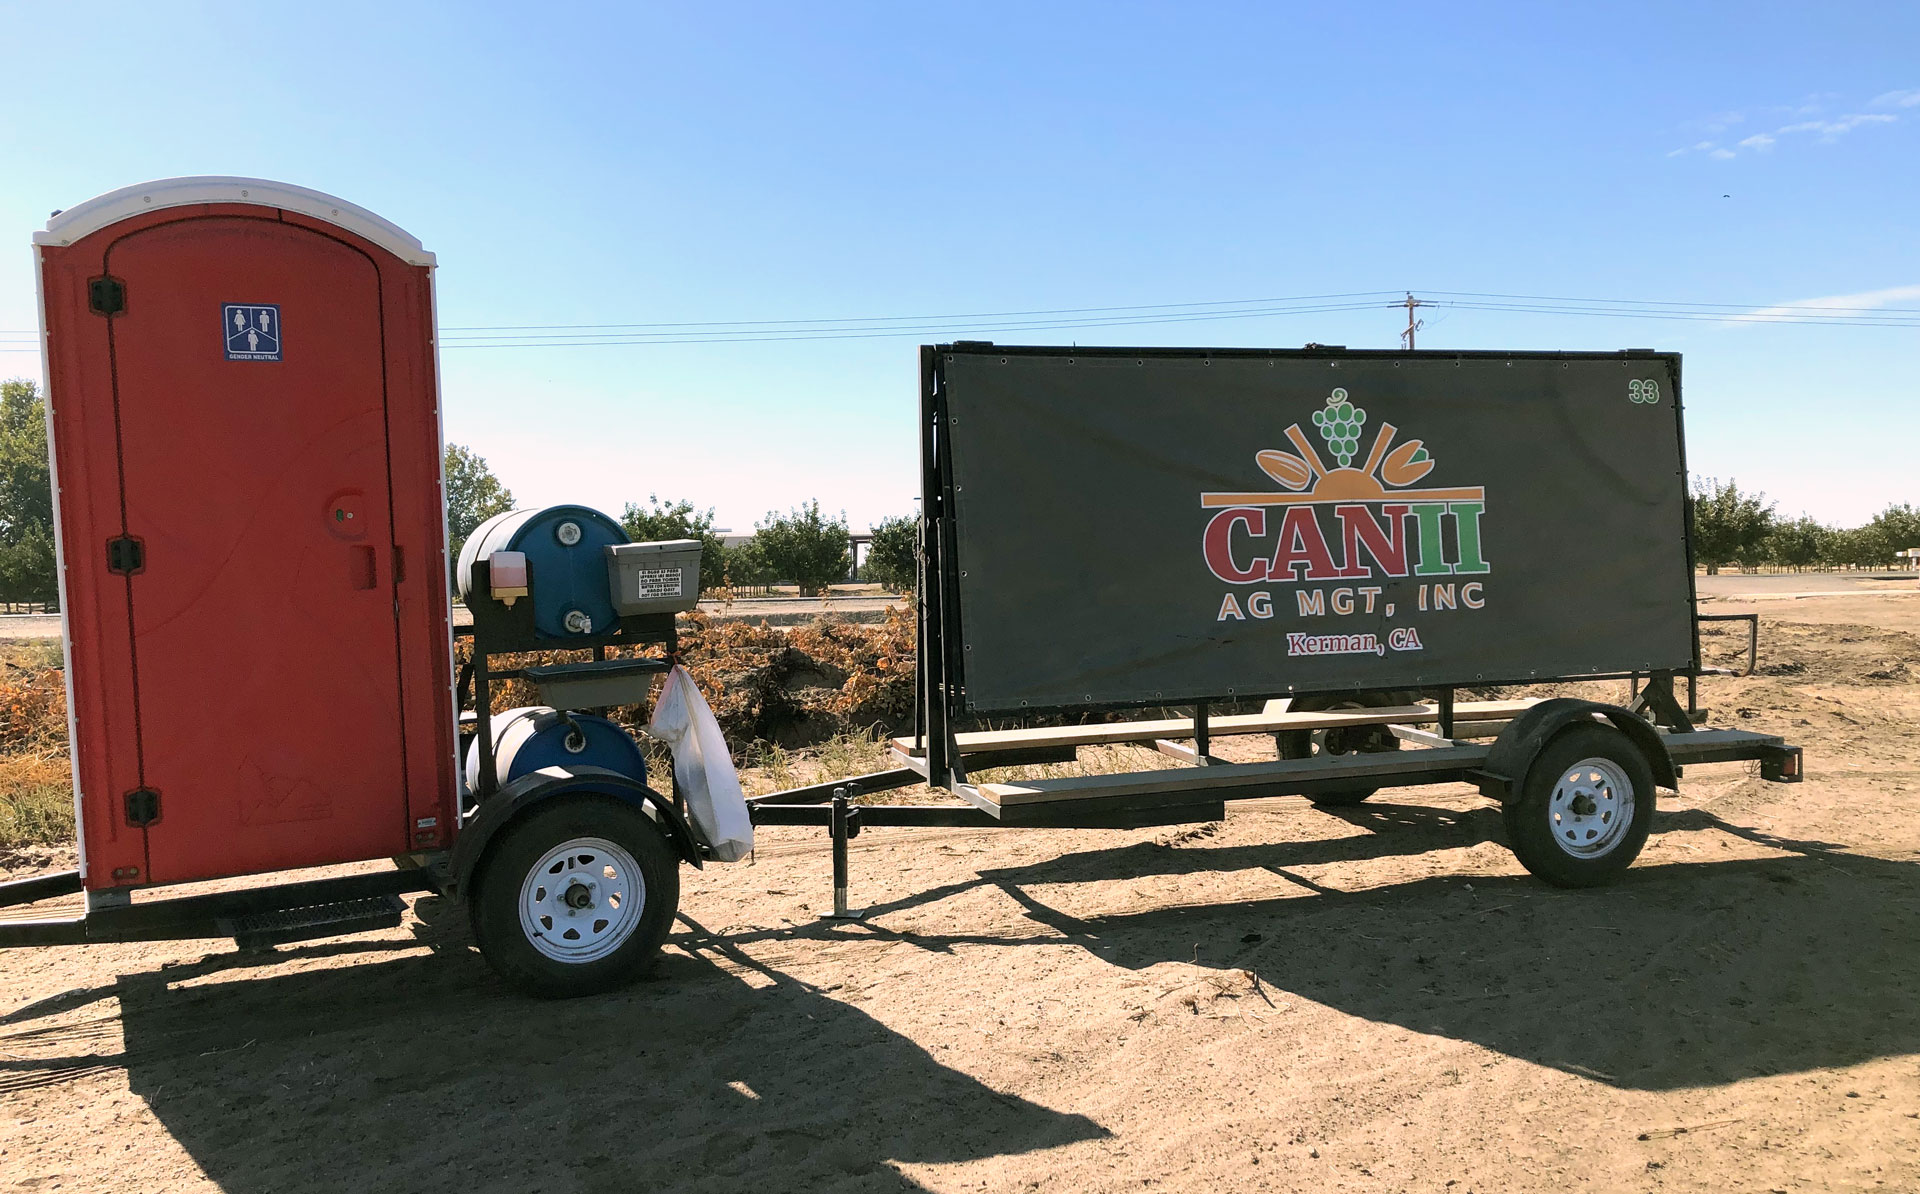 Backlit by bright sun on a four-wheeled extended trailer are a red portable toilet with a hand-washing station on the left and an olive-colored company sign nearly the height of the toilet and three times as long on the right. The trailer sits on a dirt road beside a field.